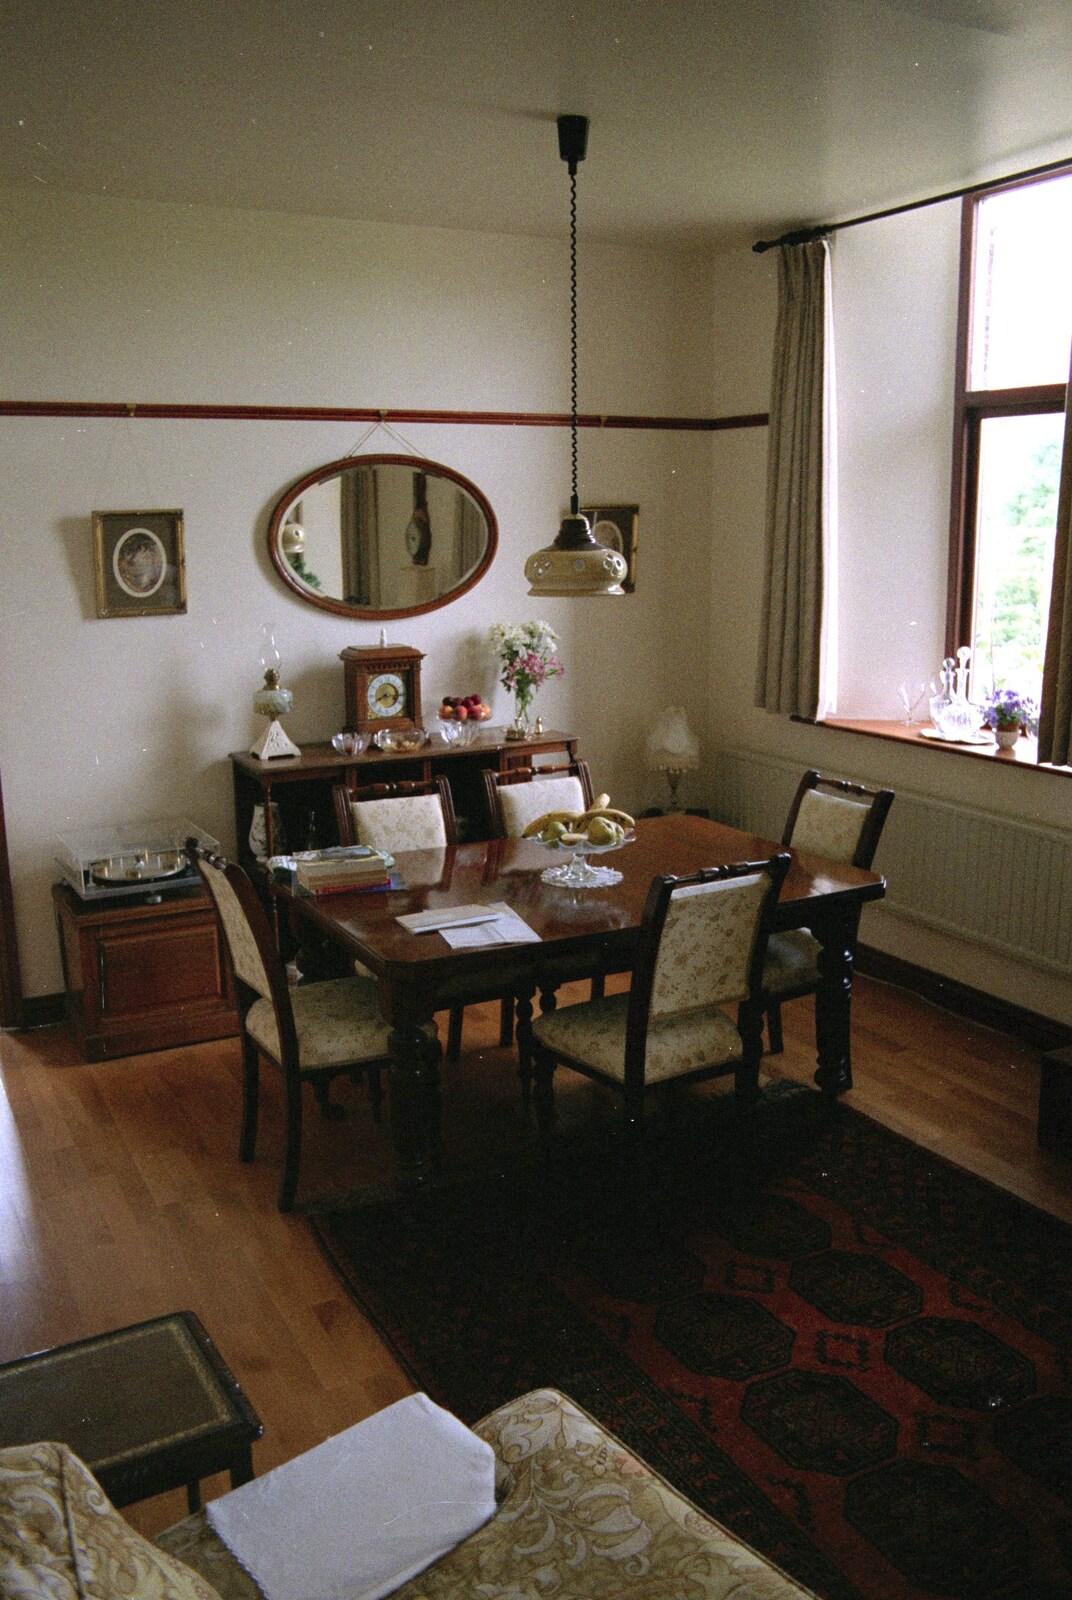 The dining room from Plymouth and The Chapel, Hoo Meavy, Devon - 25th July 1991